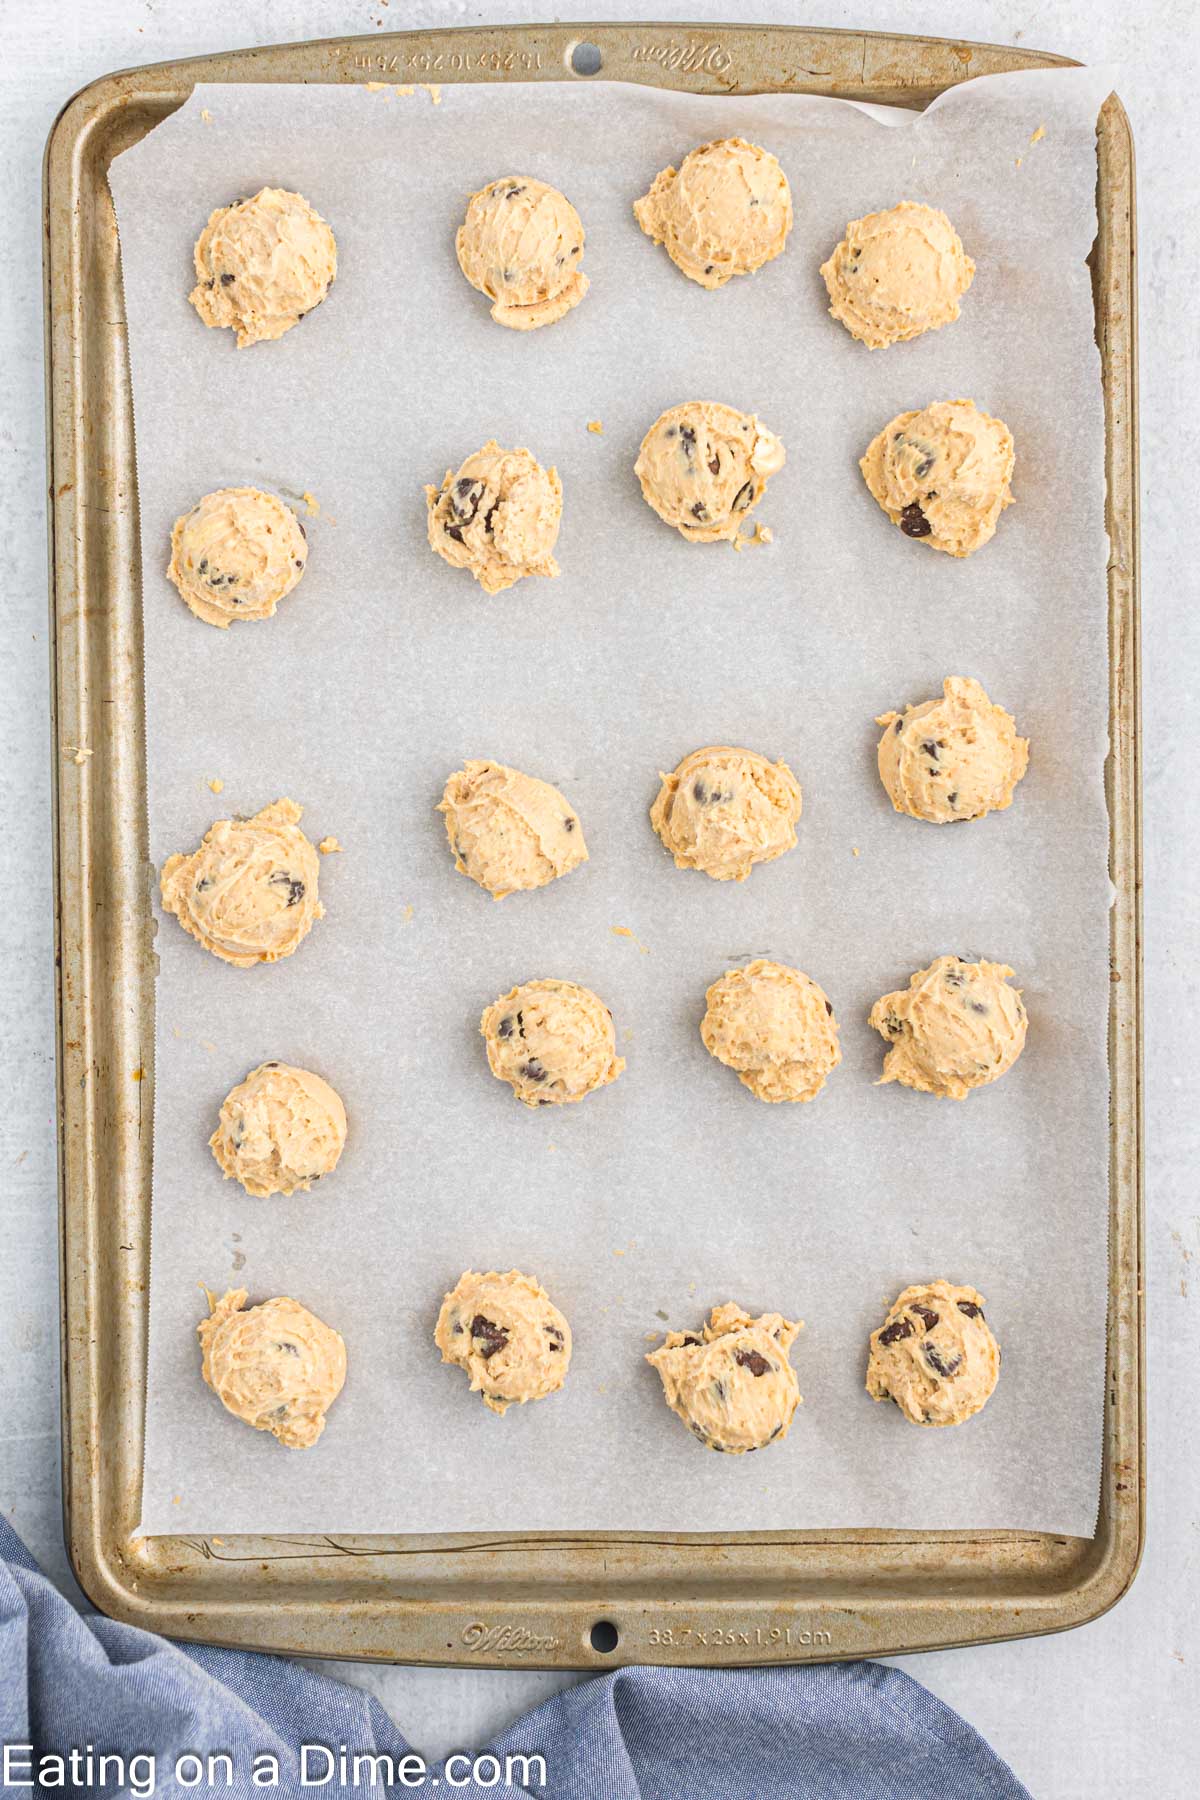 Cookie dough balls placed on the cookie sheet